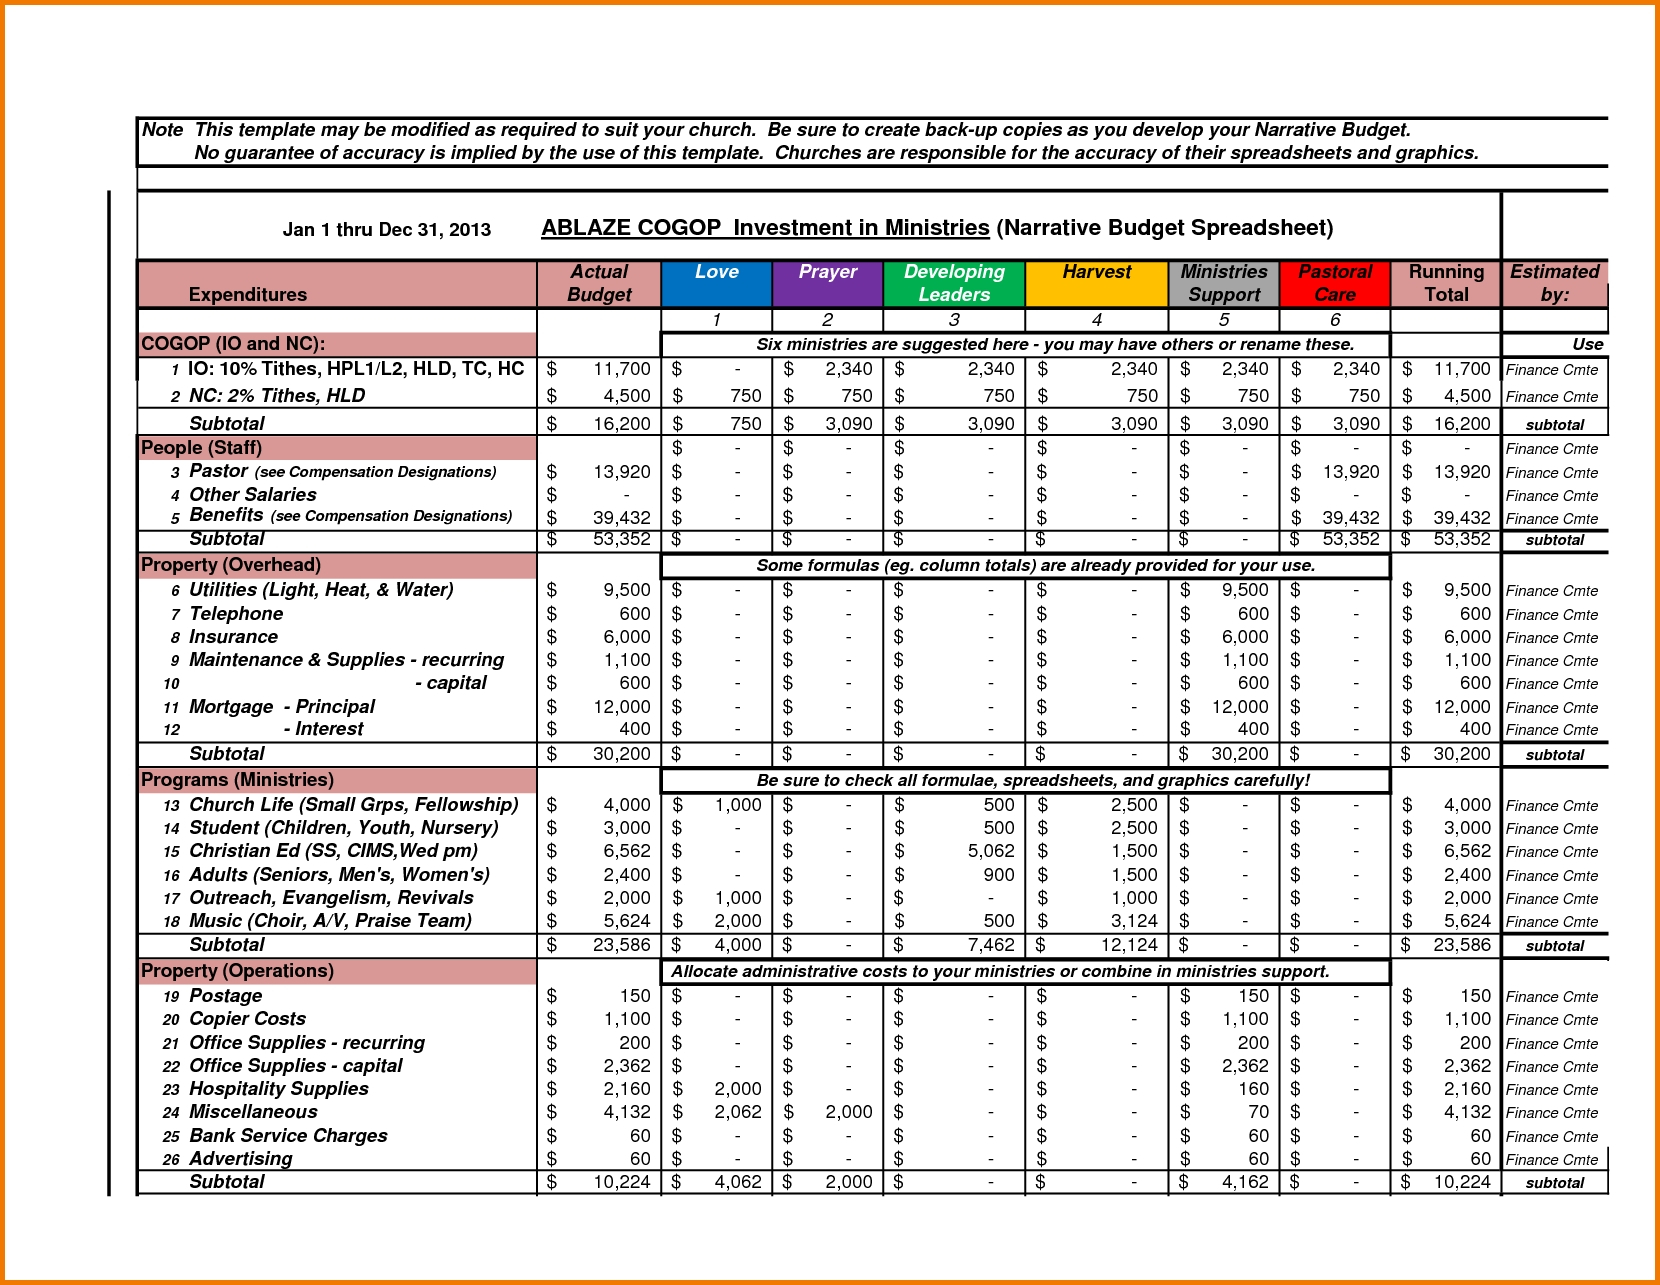 monthly-budget-planner-excel-free-download-example-of-spreadshee